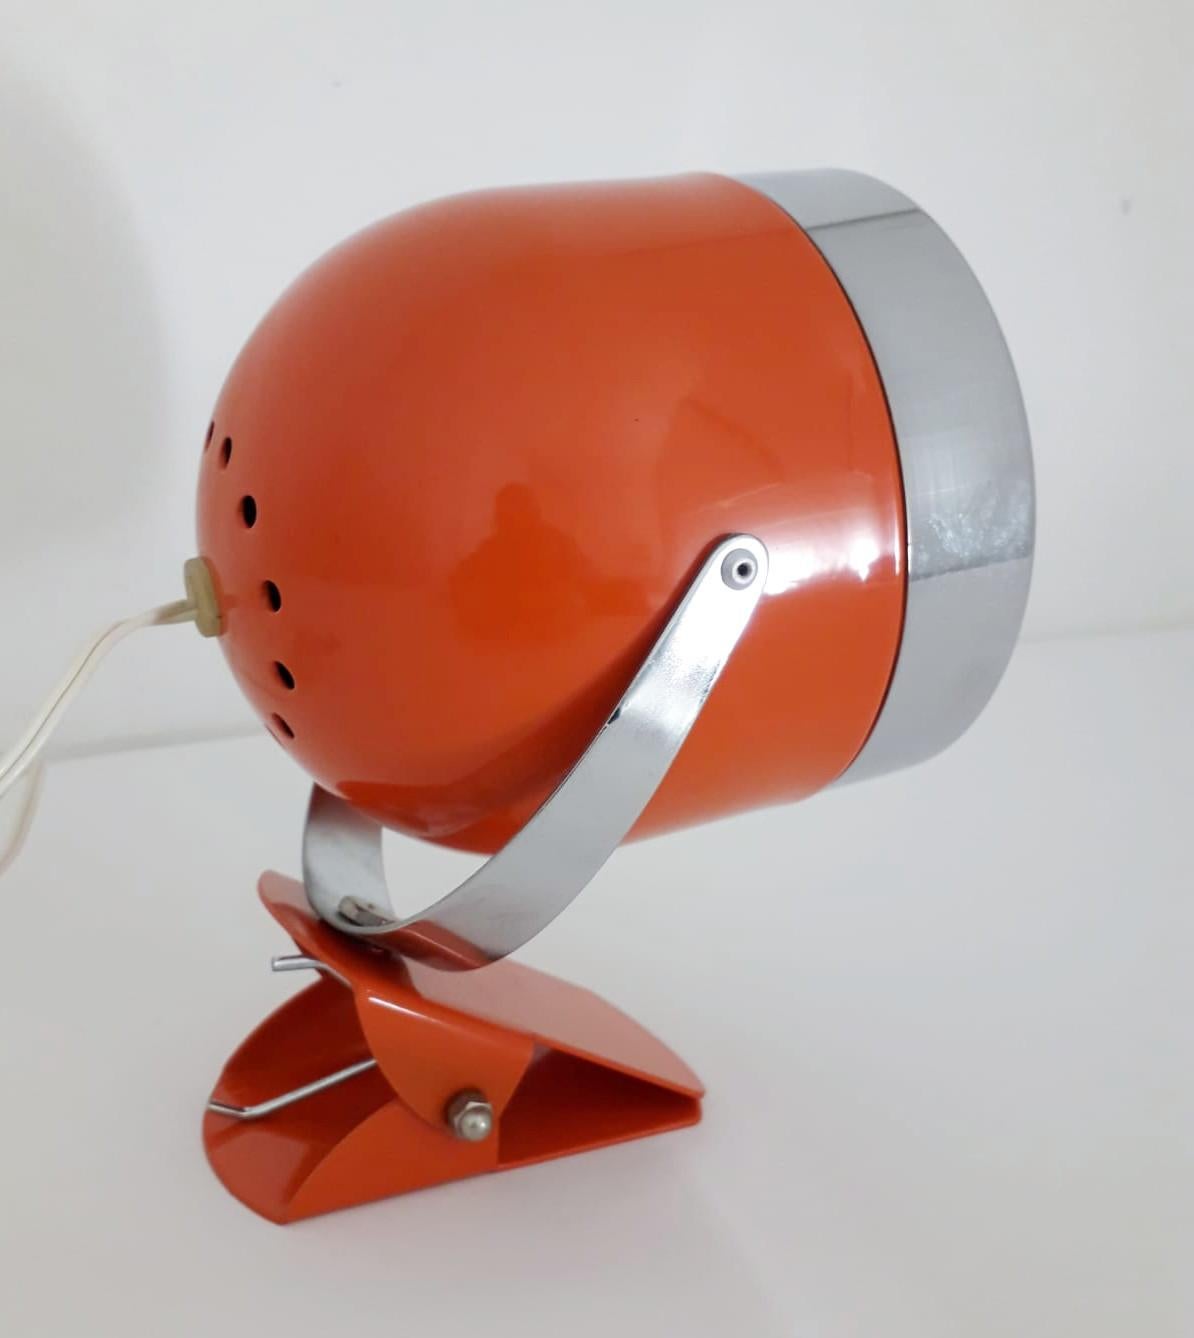 Vintage Italian adjustable spotlight with glossy orange enameled body and chrome hardware, mounted with simple clip base, can be used as wall light or table lamp / Made in Italy, circa 1970s
1 light / E14 type / max 40W
Measures: Height 7 inches,